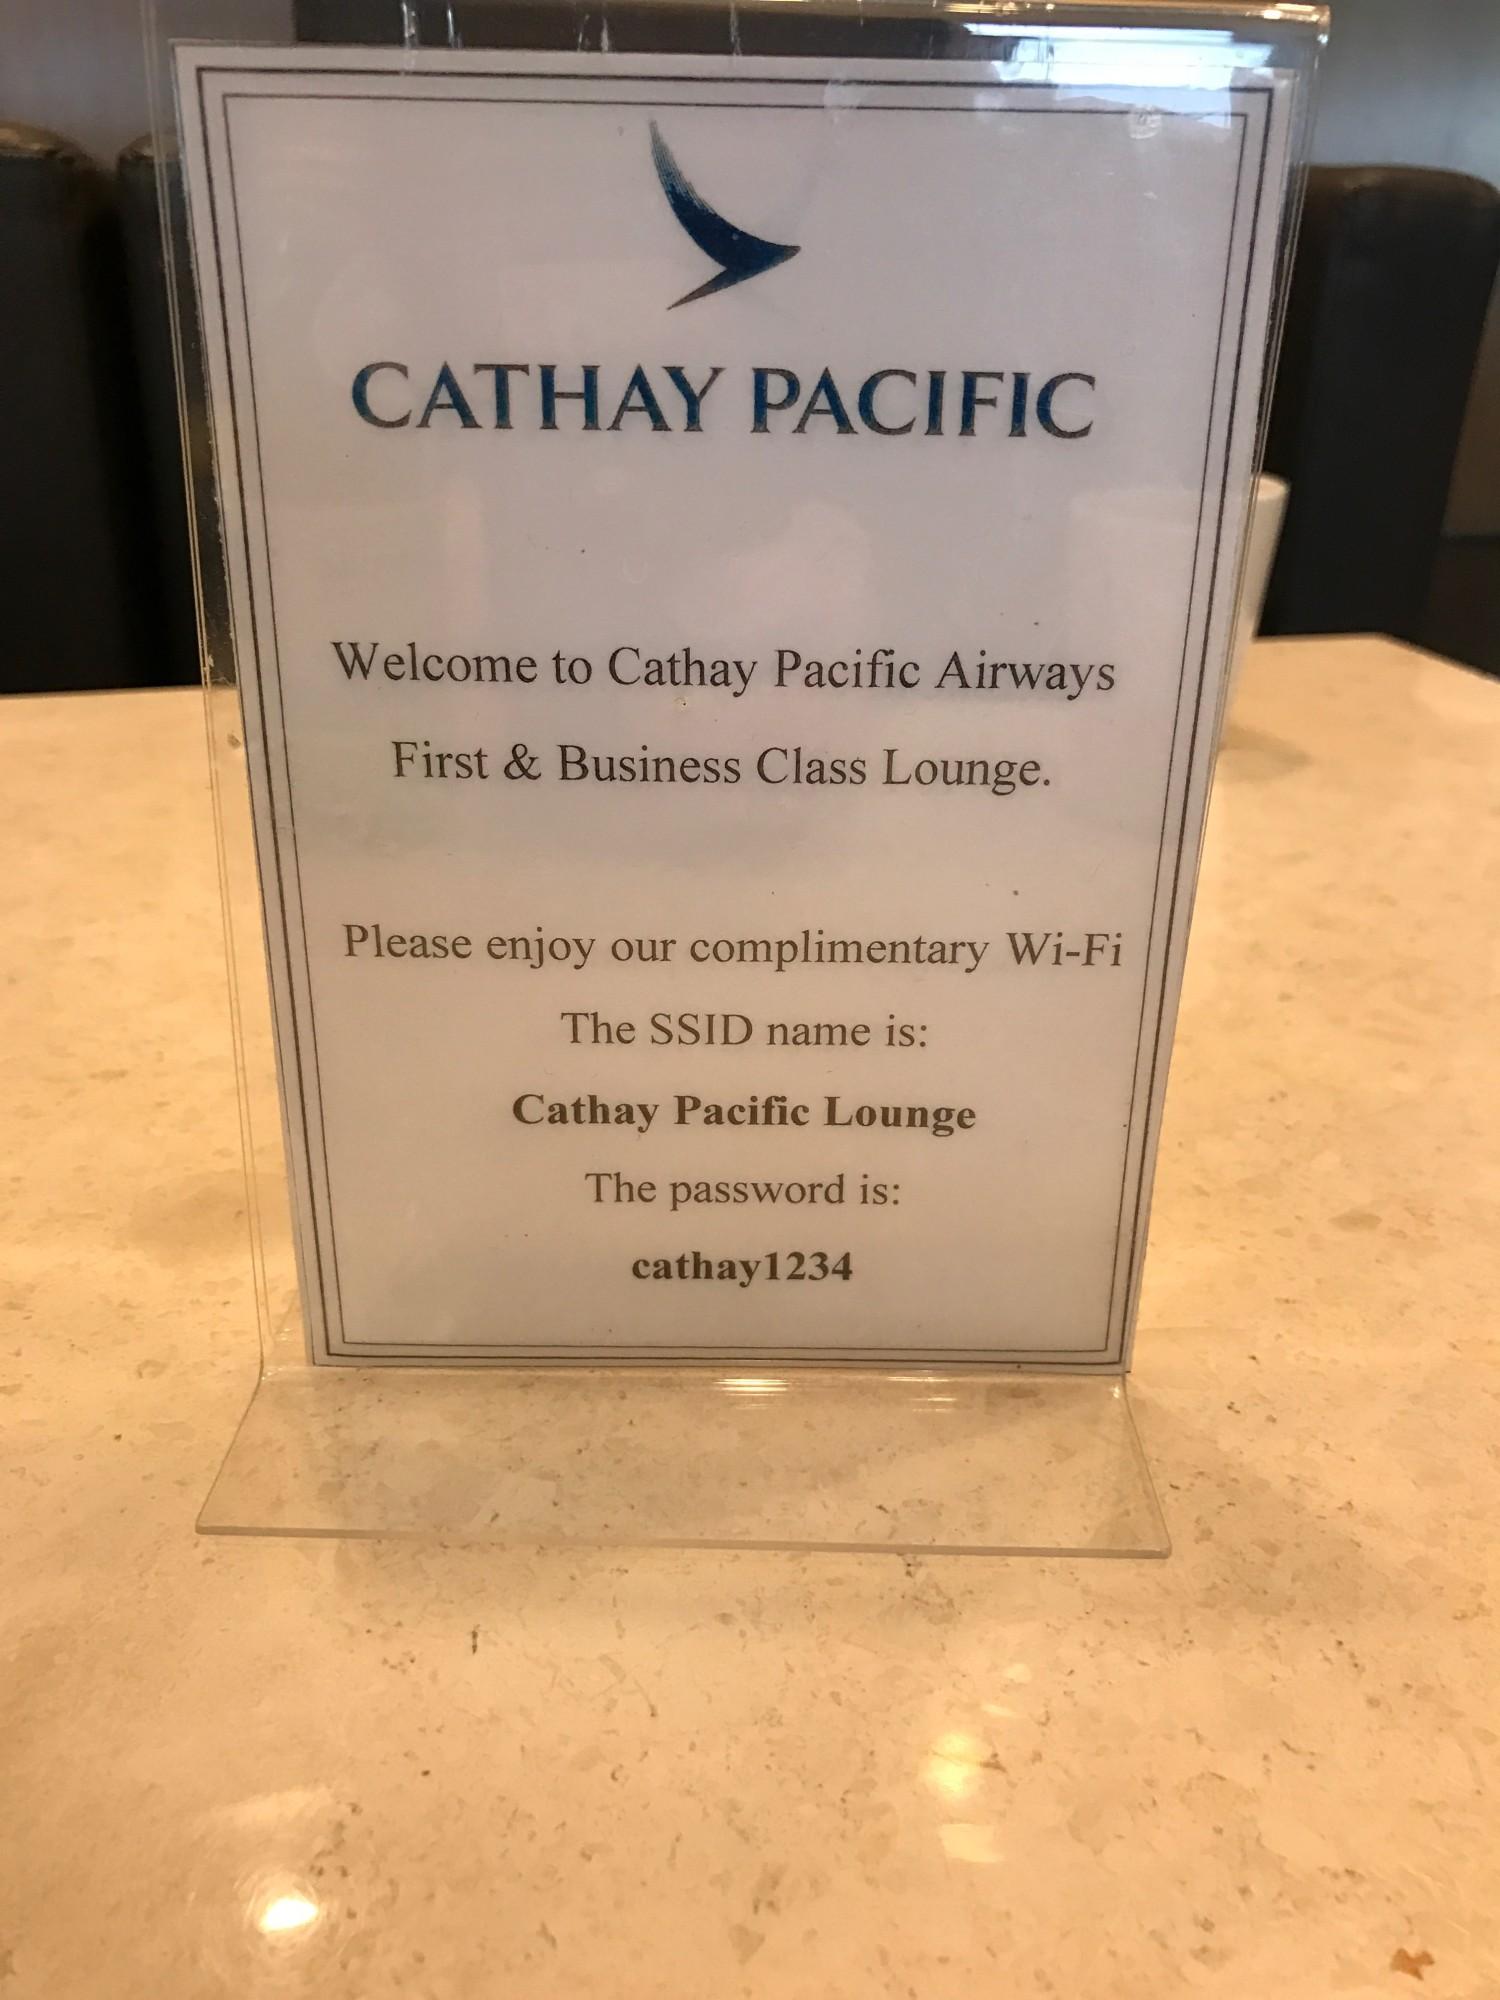 Cathay Pacific First and Business Class Lounge image 68 of 74